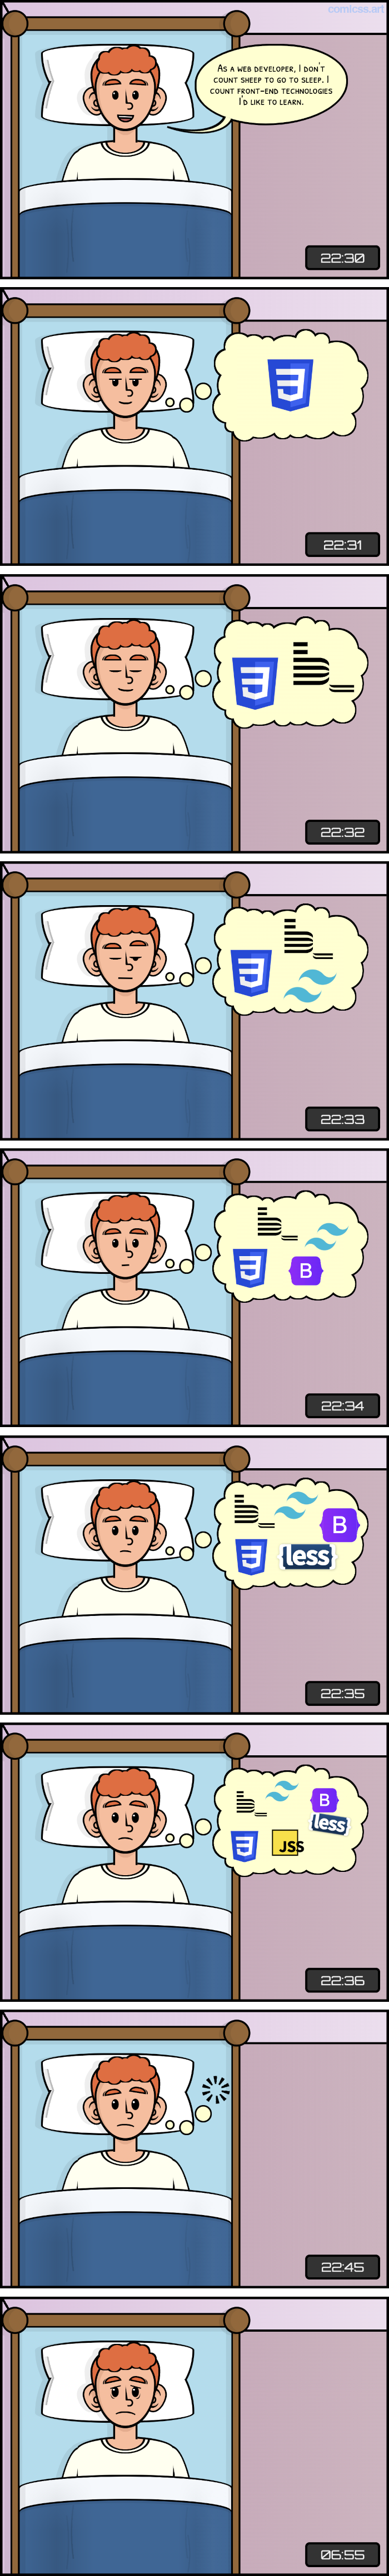 comic with 9 vertical panels, all of them showing a person in bed with a timer at the bottom right side of the panel. Panel 1: 22:30. The person smiles: 'as a web developer, I do not count sheep to go to sleep. I count front-end technologies that I would like to learn'. Panel 2: 22:31. The person starts falling asleep while dreaming/counting the CSS3 logo. Panel 3: 22:32. The person is sleeping merrilly while dreaming/counting the CSS3 and BEM logos. Panel 4: 22:33. The person opens an eye slightly while counting the CSS3, BEM, and Tailwind logos. Panel 5: 22:34. The person is startled while counting the CSS, BEM, Tailwind, and Bootstrap logos. Panel 6: 22:35. The person starts frawning while counting the CSS, BEM, Tailwind, Bootstrap, and Less logos. Panel 7: 22:36. The person looks worried while counting the CSS, BEM, Tailwind, Bootstrap, Less, and CSS-in-JS (JSS) logos. Panel 8: 22:45. The dream/counting bubble bursts with a worried looking person. Panel 9: 06:55. The person looks sad and sleepy, with bags under the eyes from not sleeping all night.